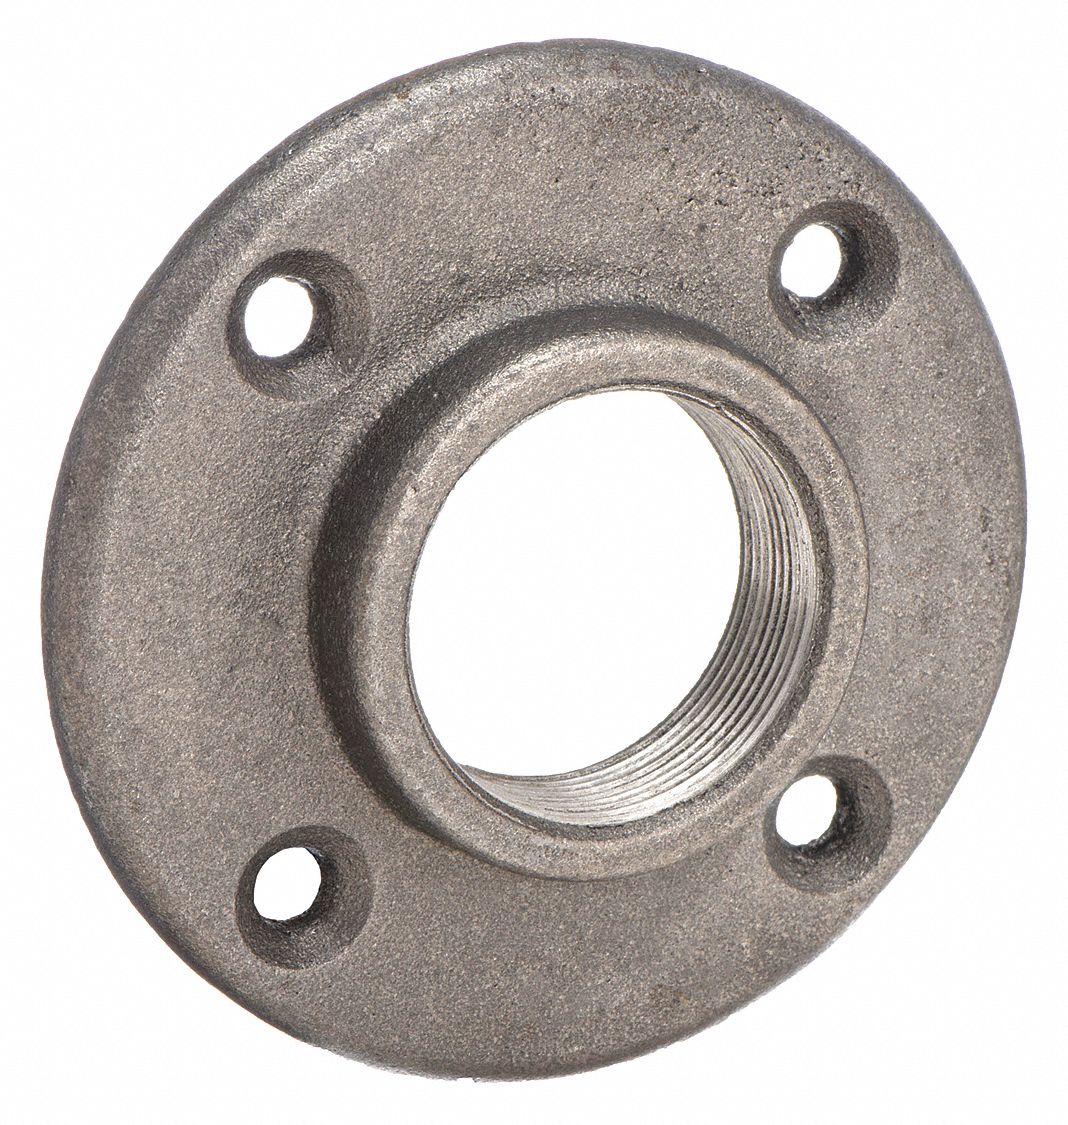 ANVIL Pipe Flange: Malleable Iron, Floor Flange, 1 in Pipe Size, Floor  Flange, Class 150